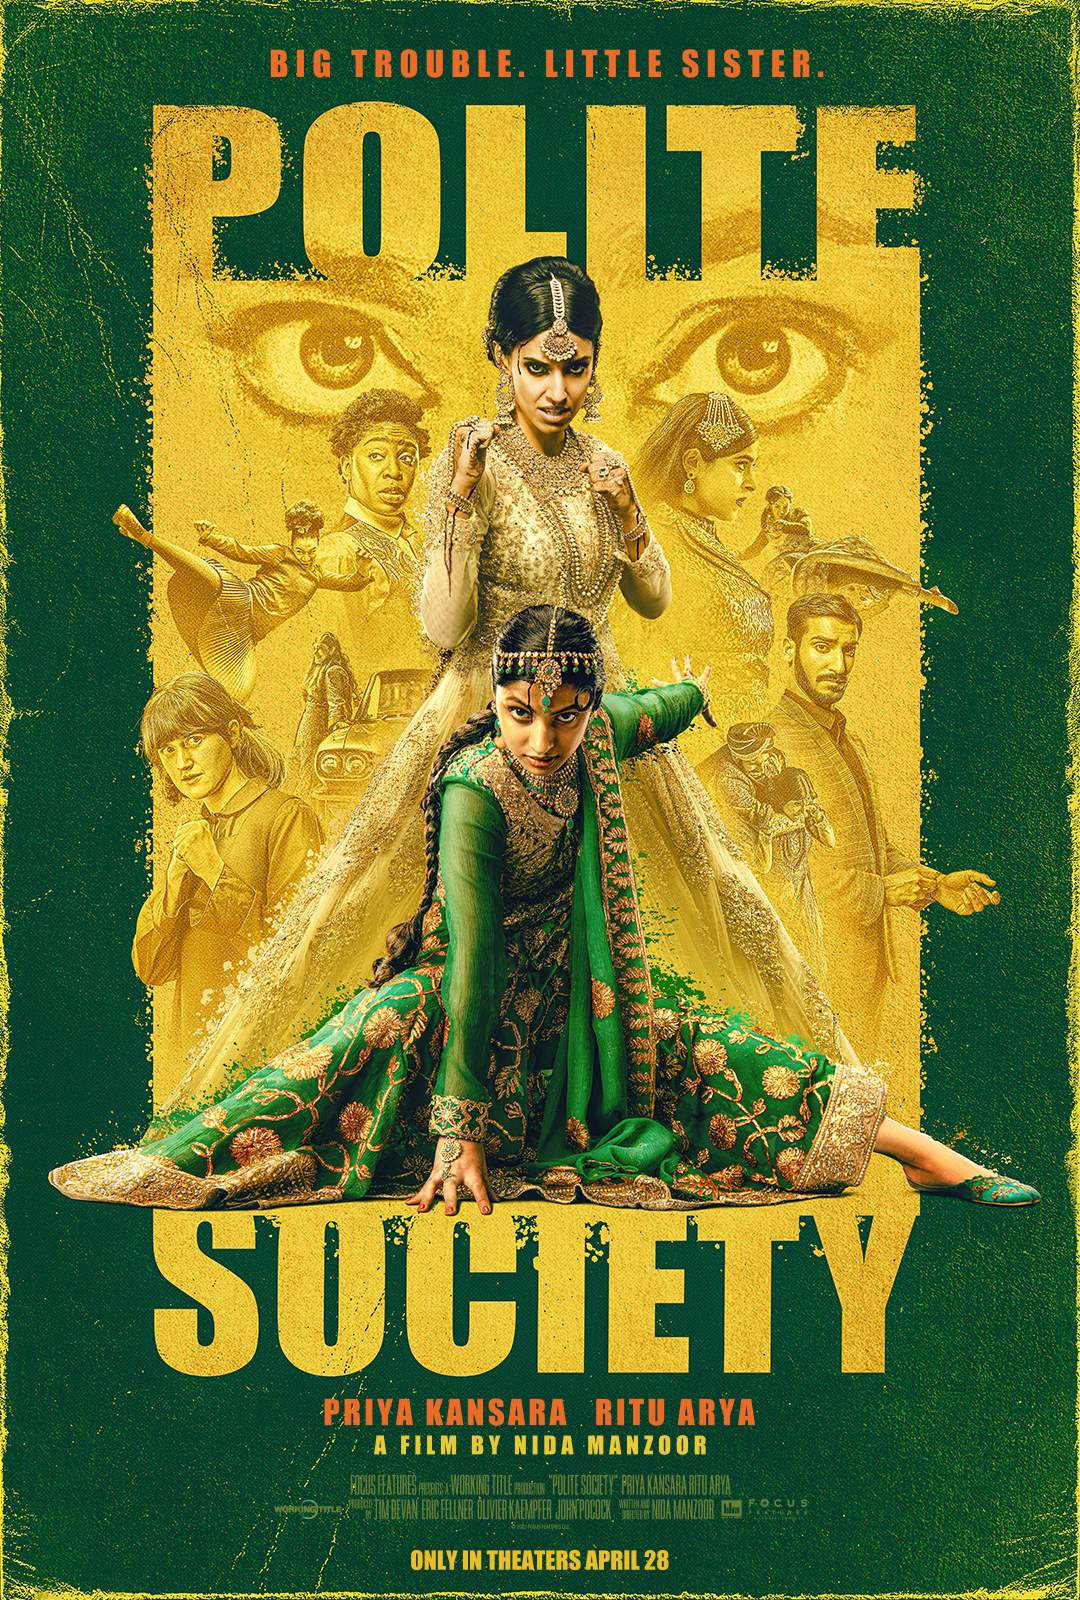 Poster for Polite Society with two sisters in elegant dresses performing martial arts poses.